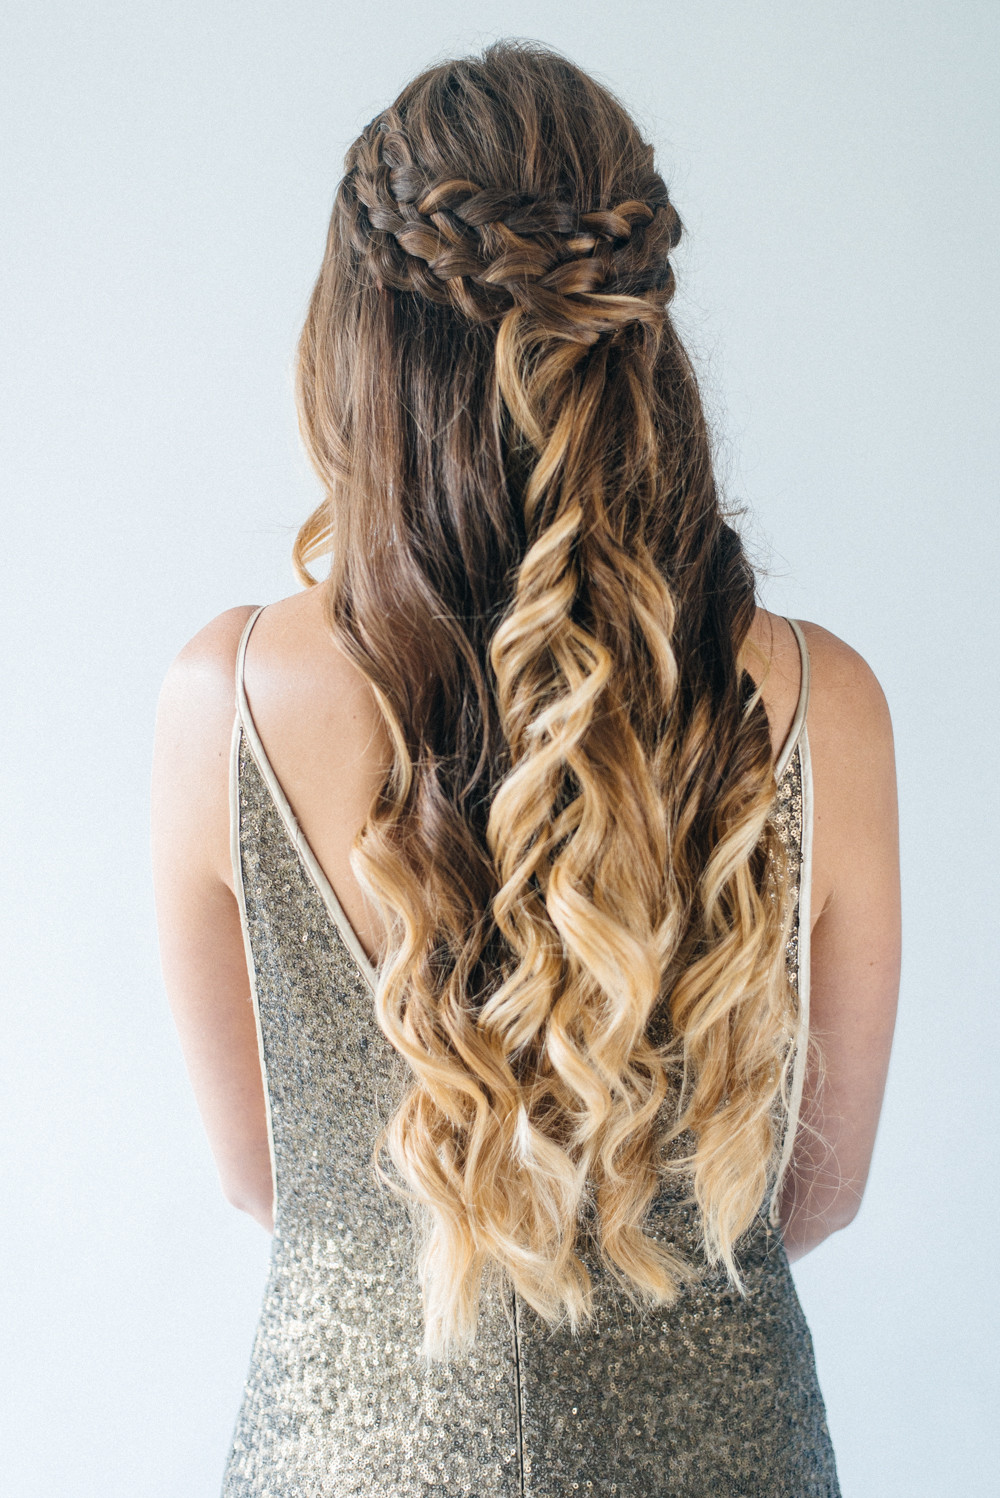 Half Up Half Down Hairstyle For Wedding
 Inspiration For Half Up Half Down Wedding Hair With